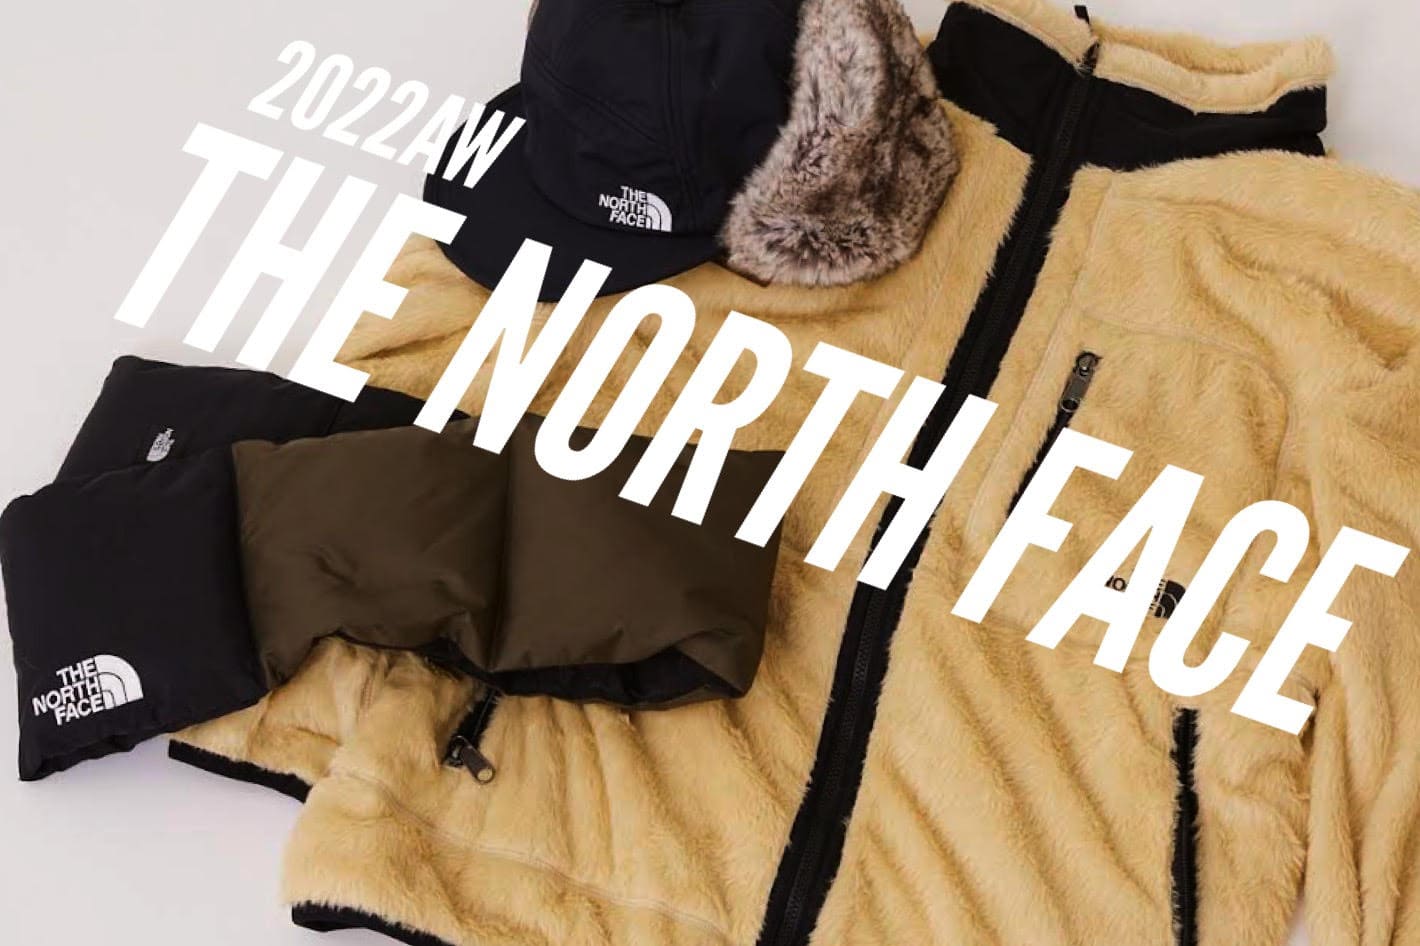 THE NORTH FACE】2022AW | CIAOPANIC TYPY(チャオパニックティピー)の 